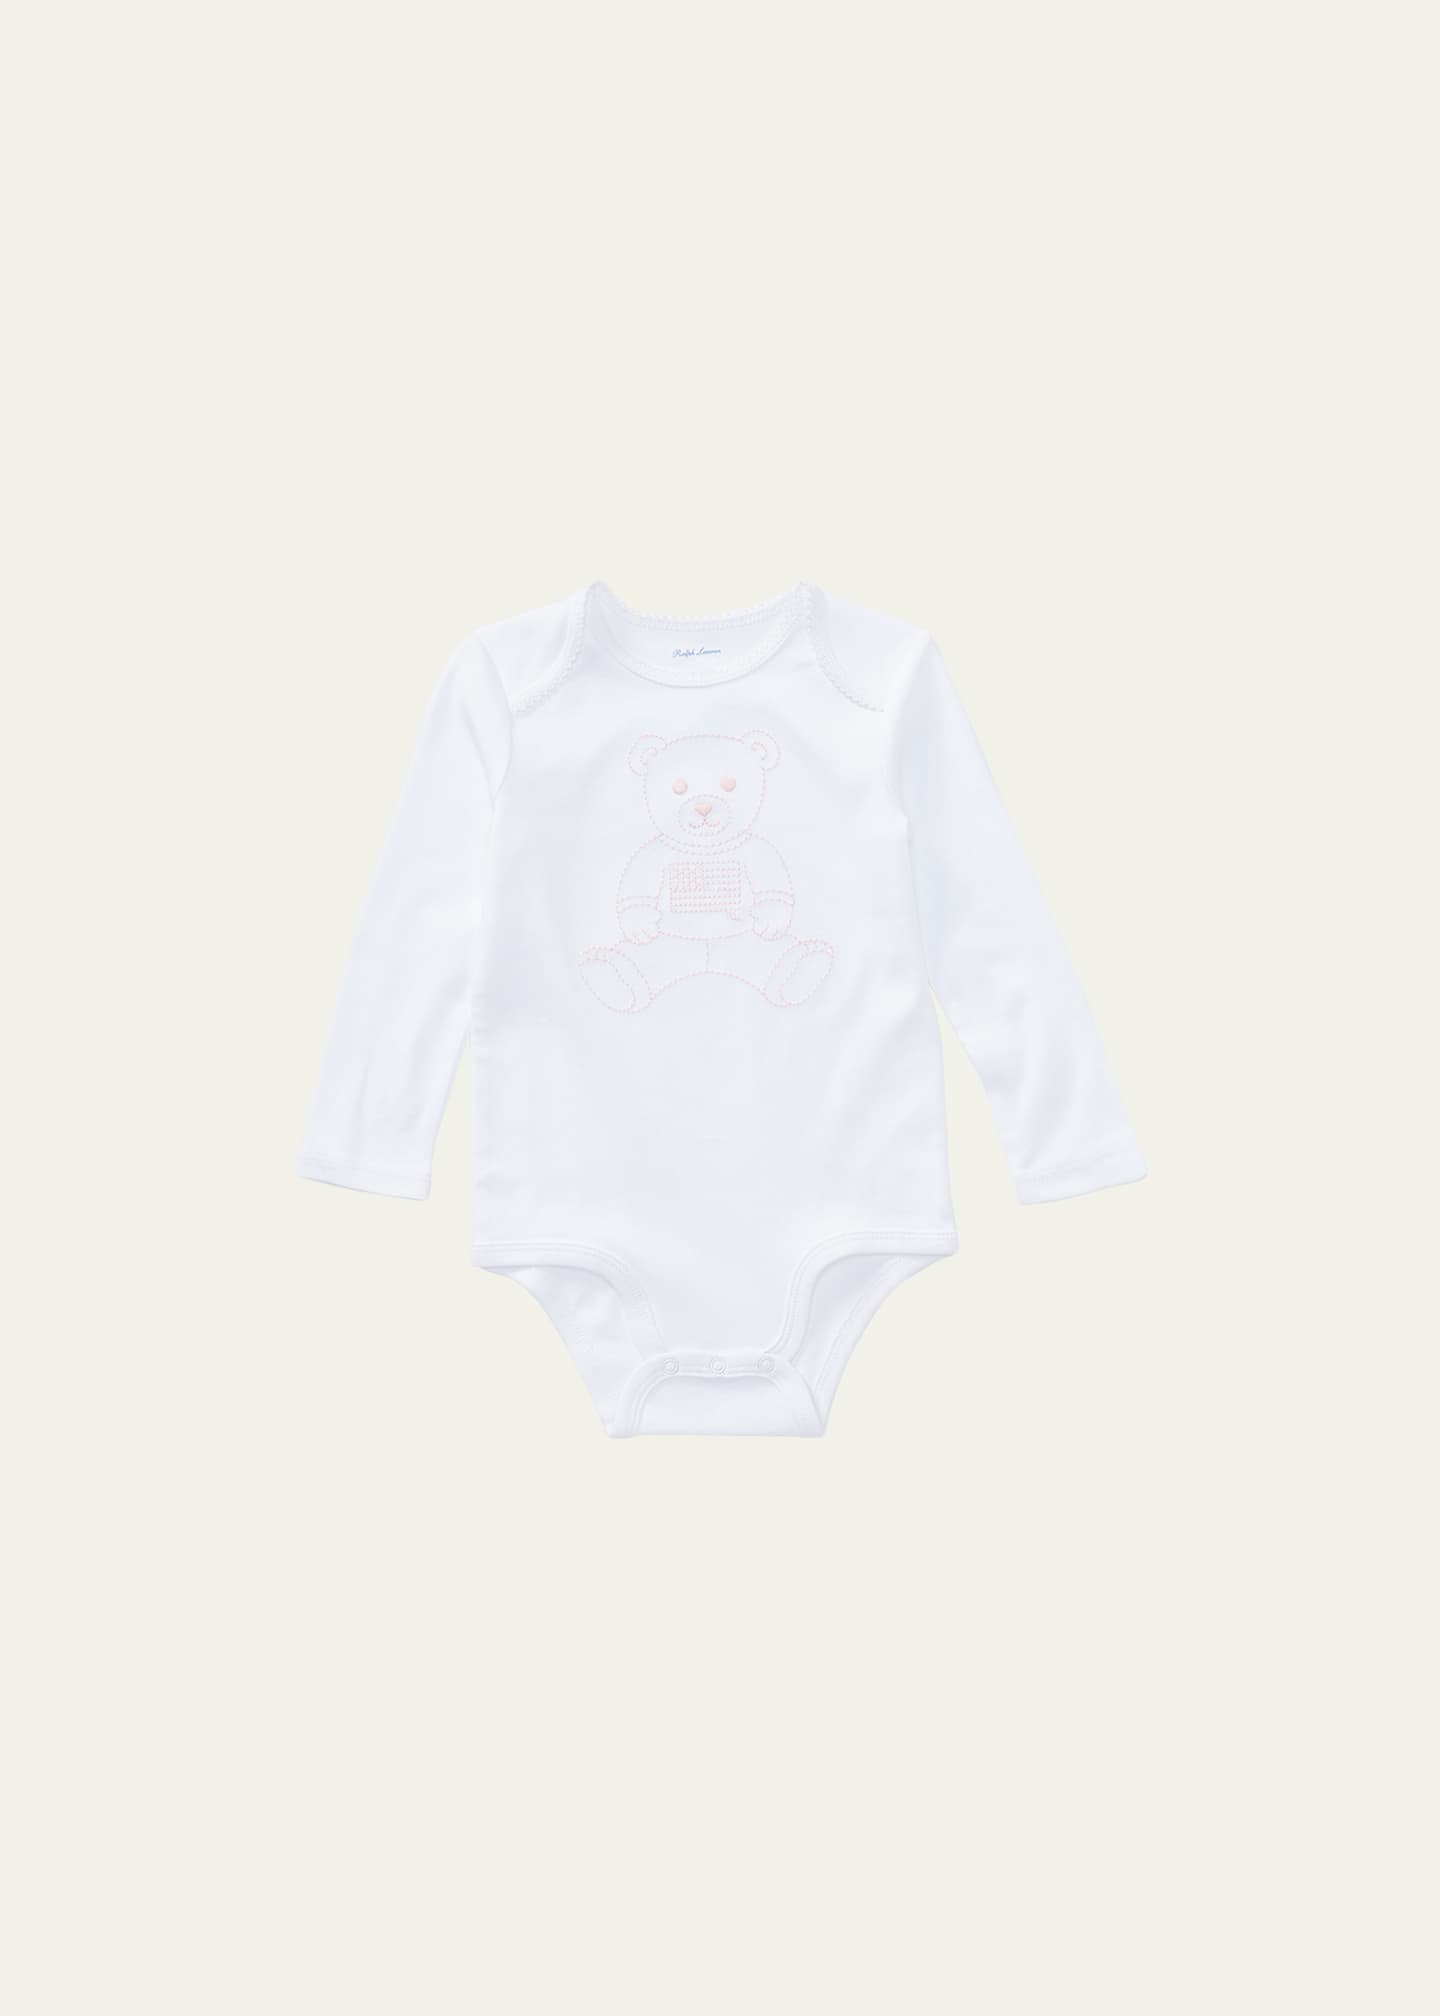 Ralph Lauren Childrenswear Polo Bear Embroidered Long-Sleeve Bodysuit, Size 3M-12M Image 1 of 2